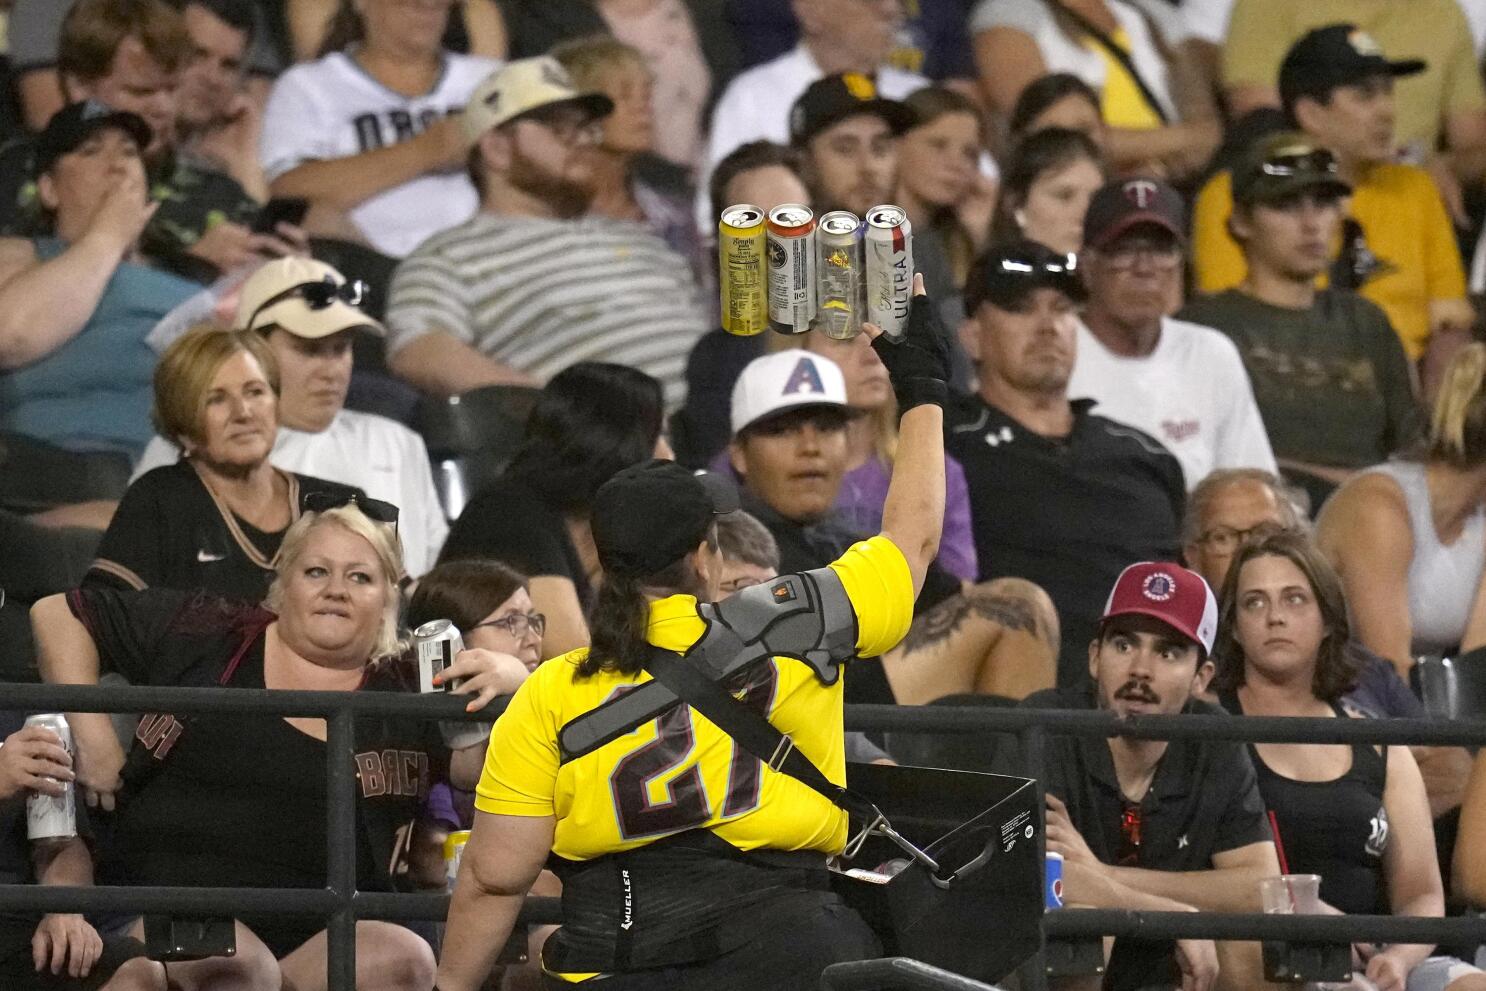 Beer sales expanded to 8th inning for some MLB teams as games speed up